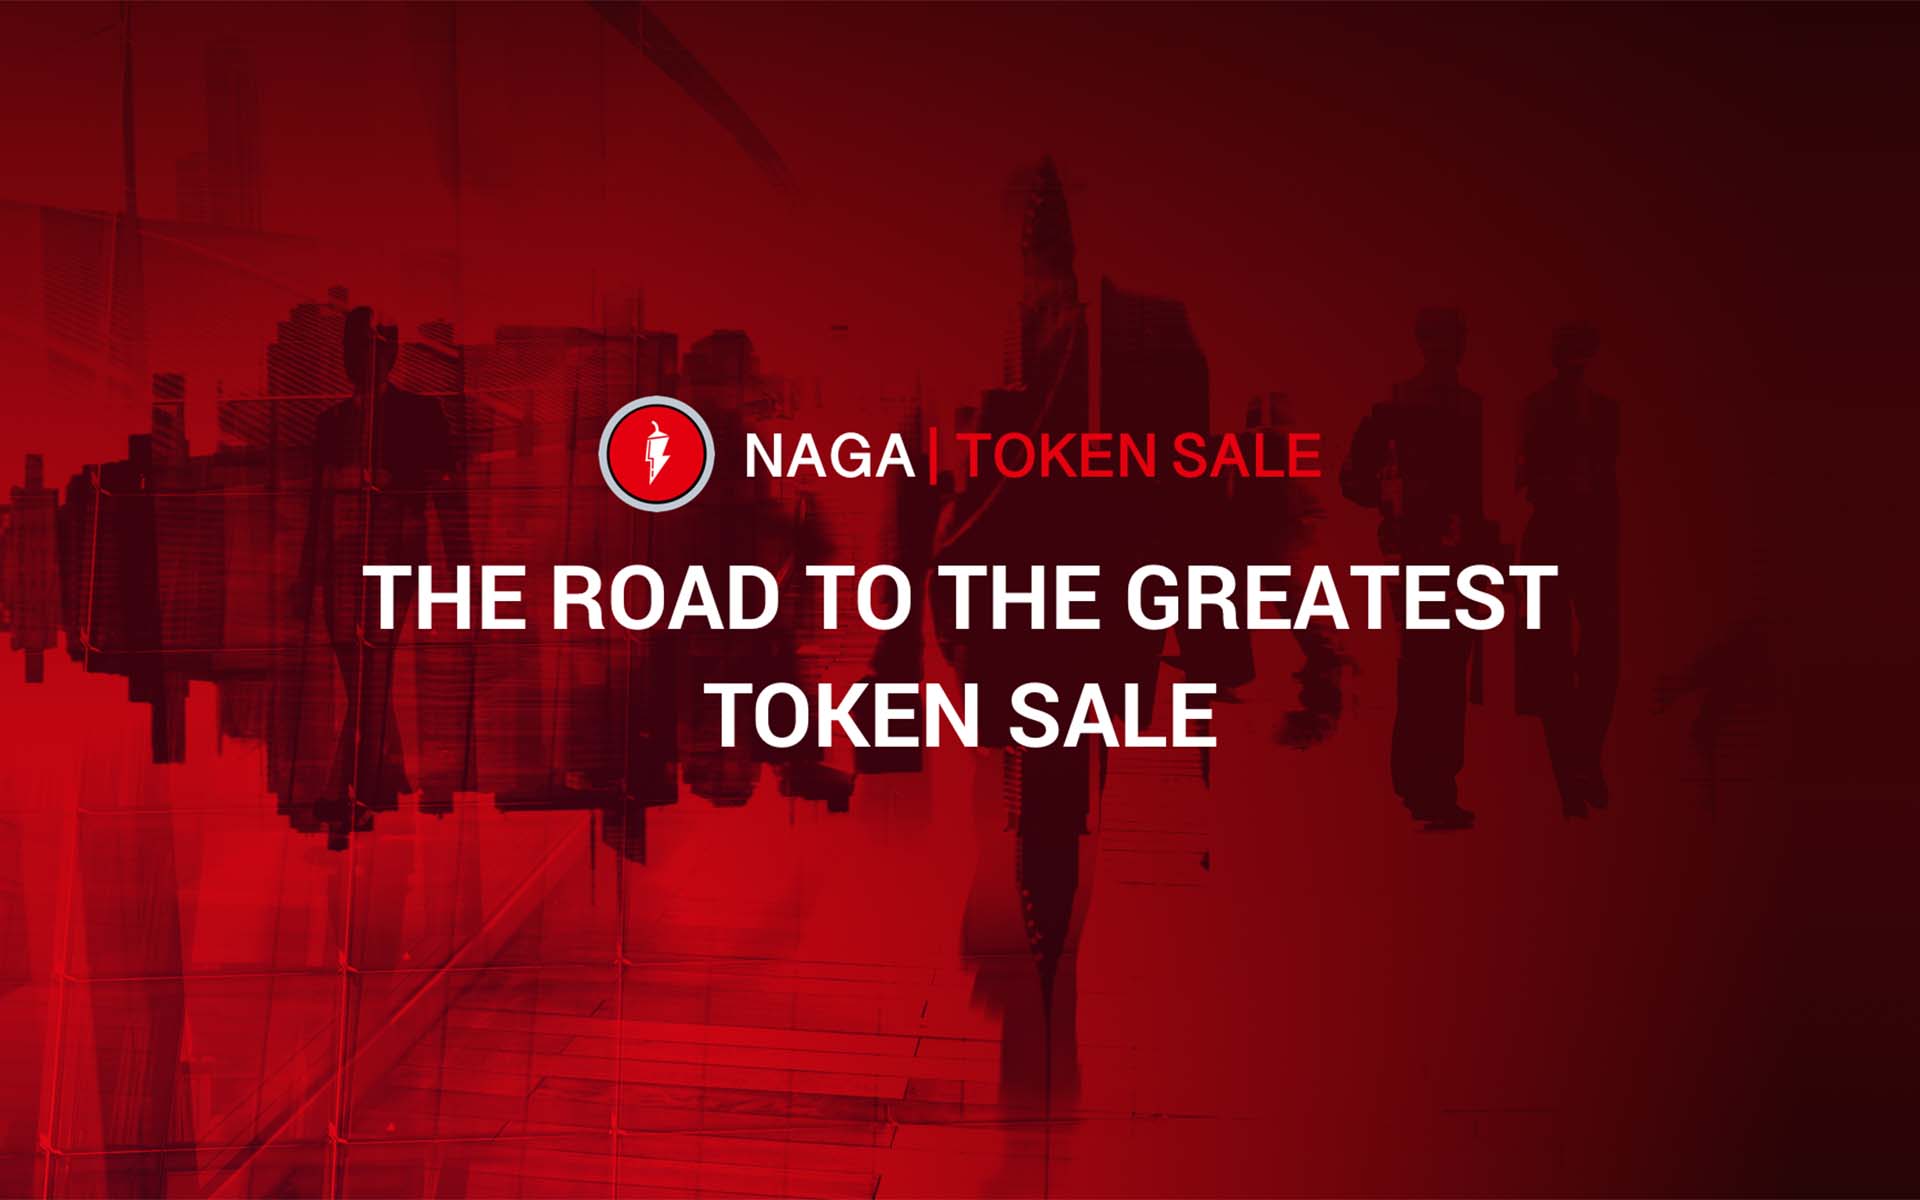 NAGA Token Sale is Nearly Over! 2 Days Left Before the End of the Token Sale!